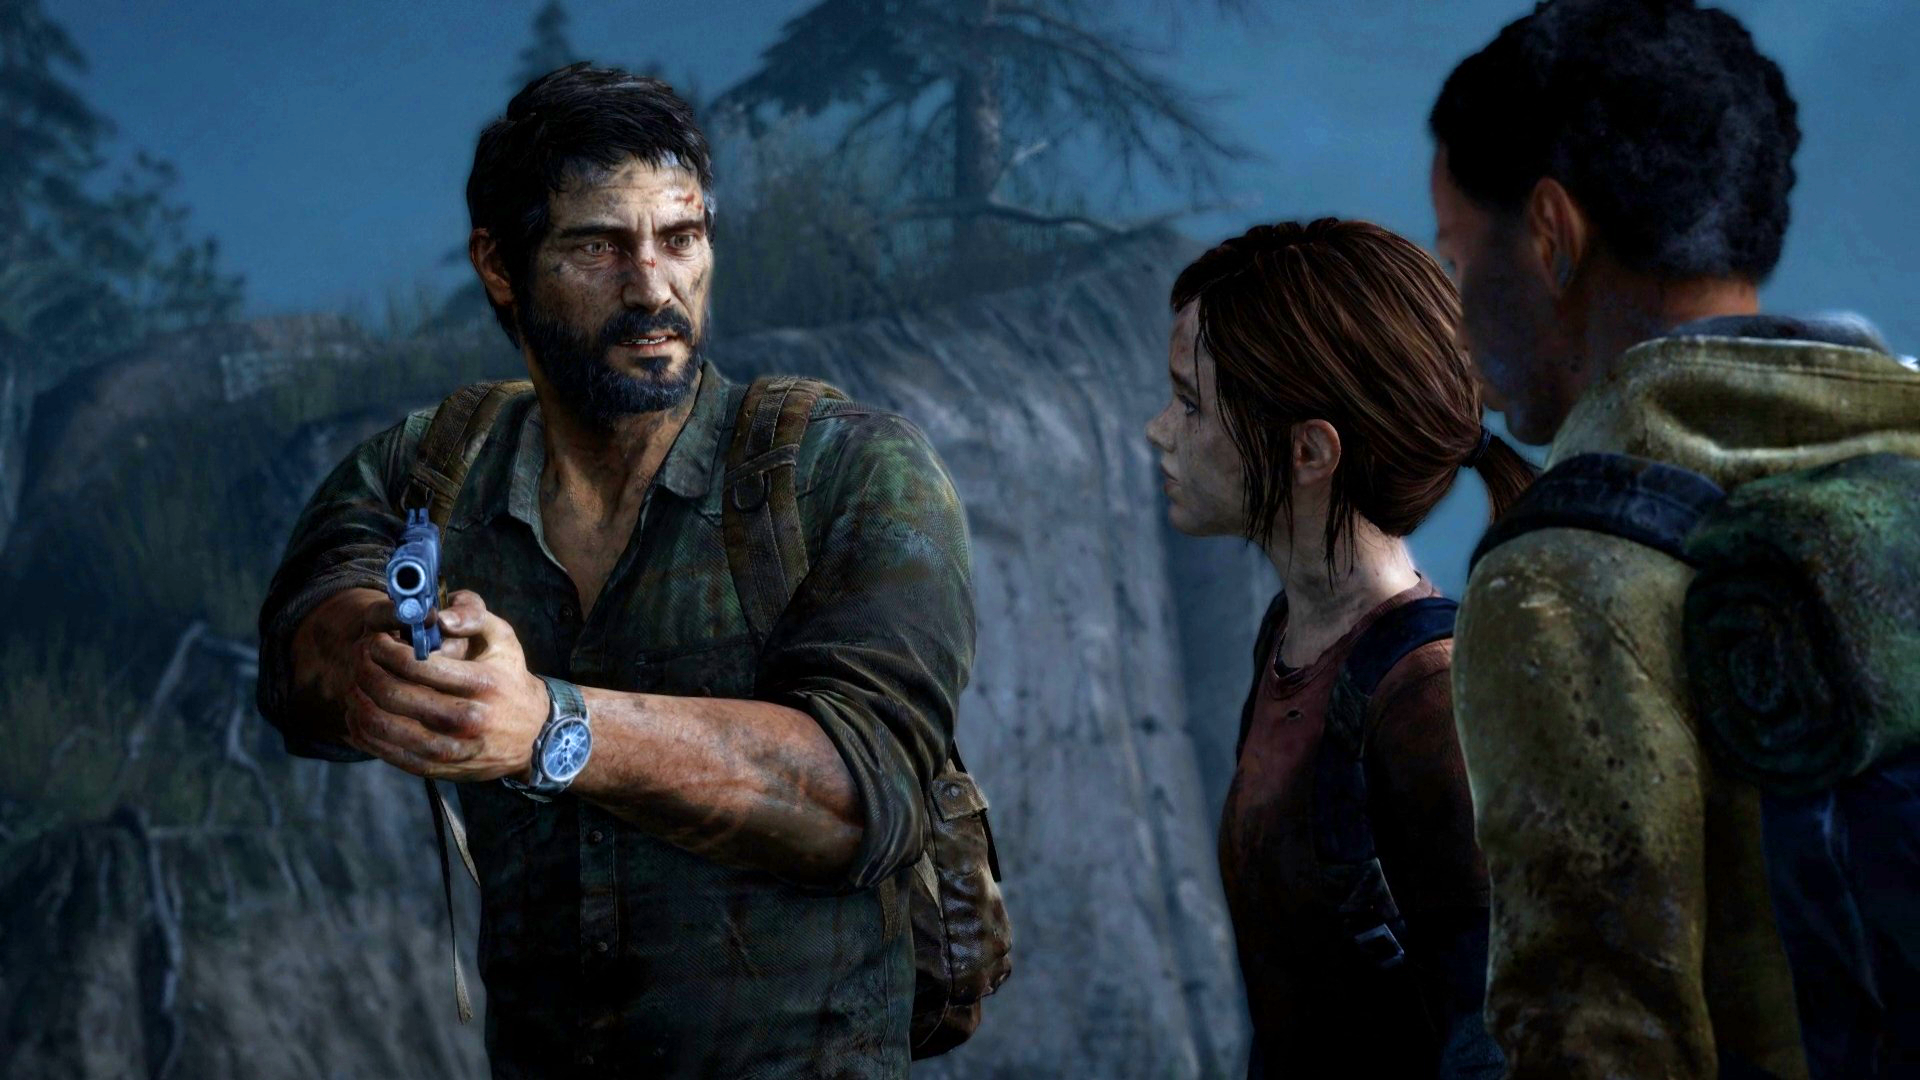 Ласт оф гейм. Джоэл the last of us. Гэбриел Луна the last of us. The last of us 1.